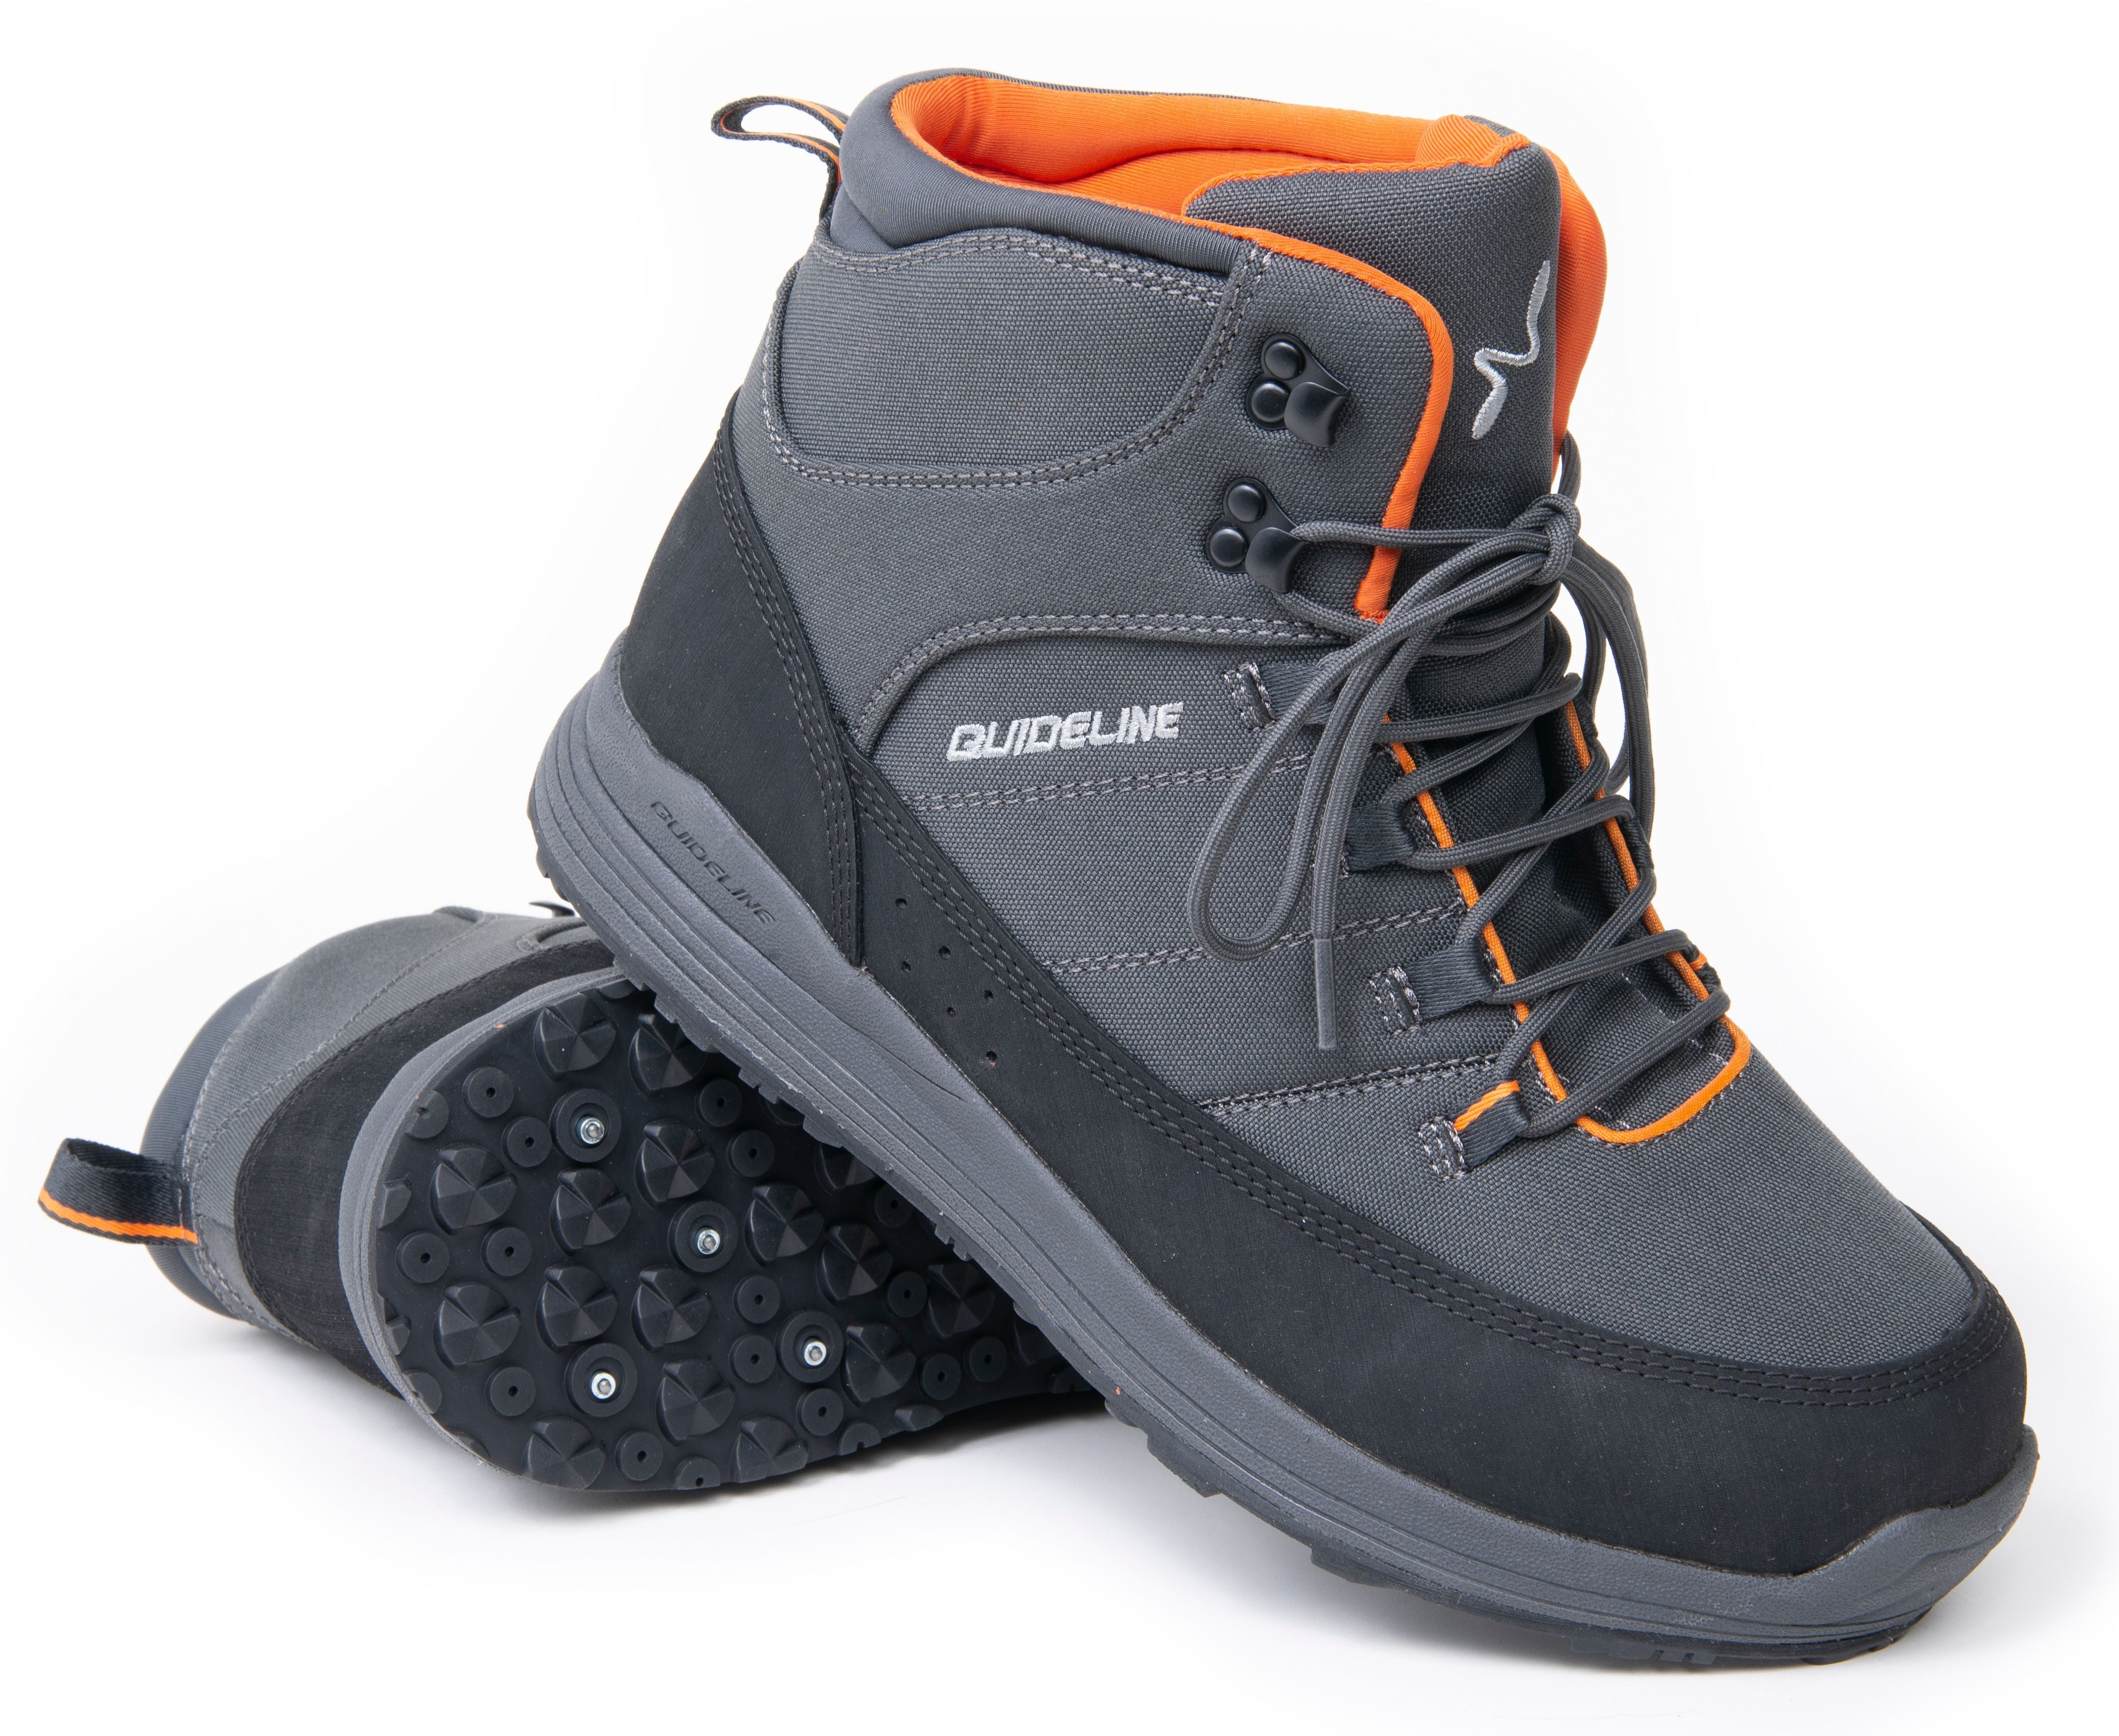 GUIDELINE LAXA 3.0 TRACTION SOLE WADING BOOT